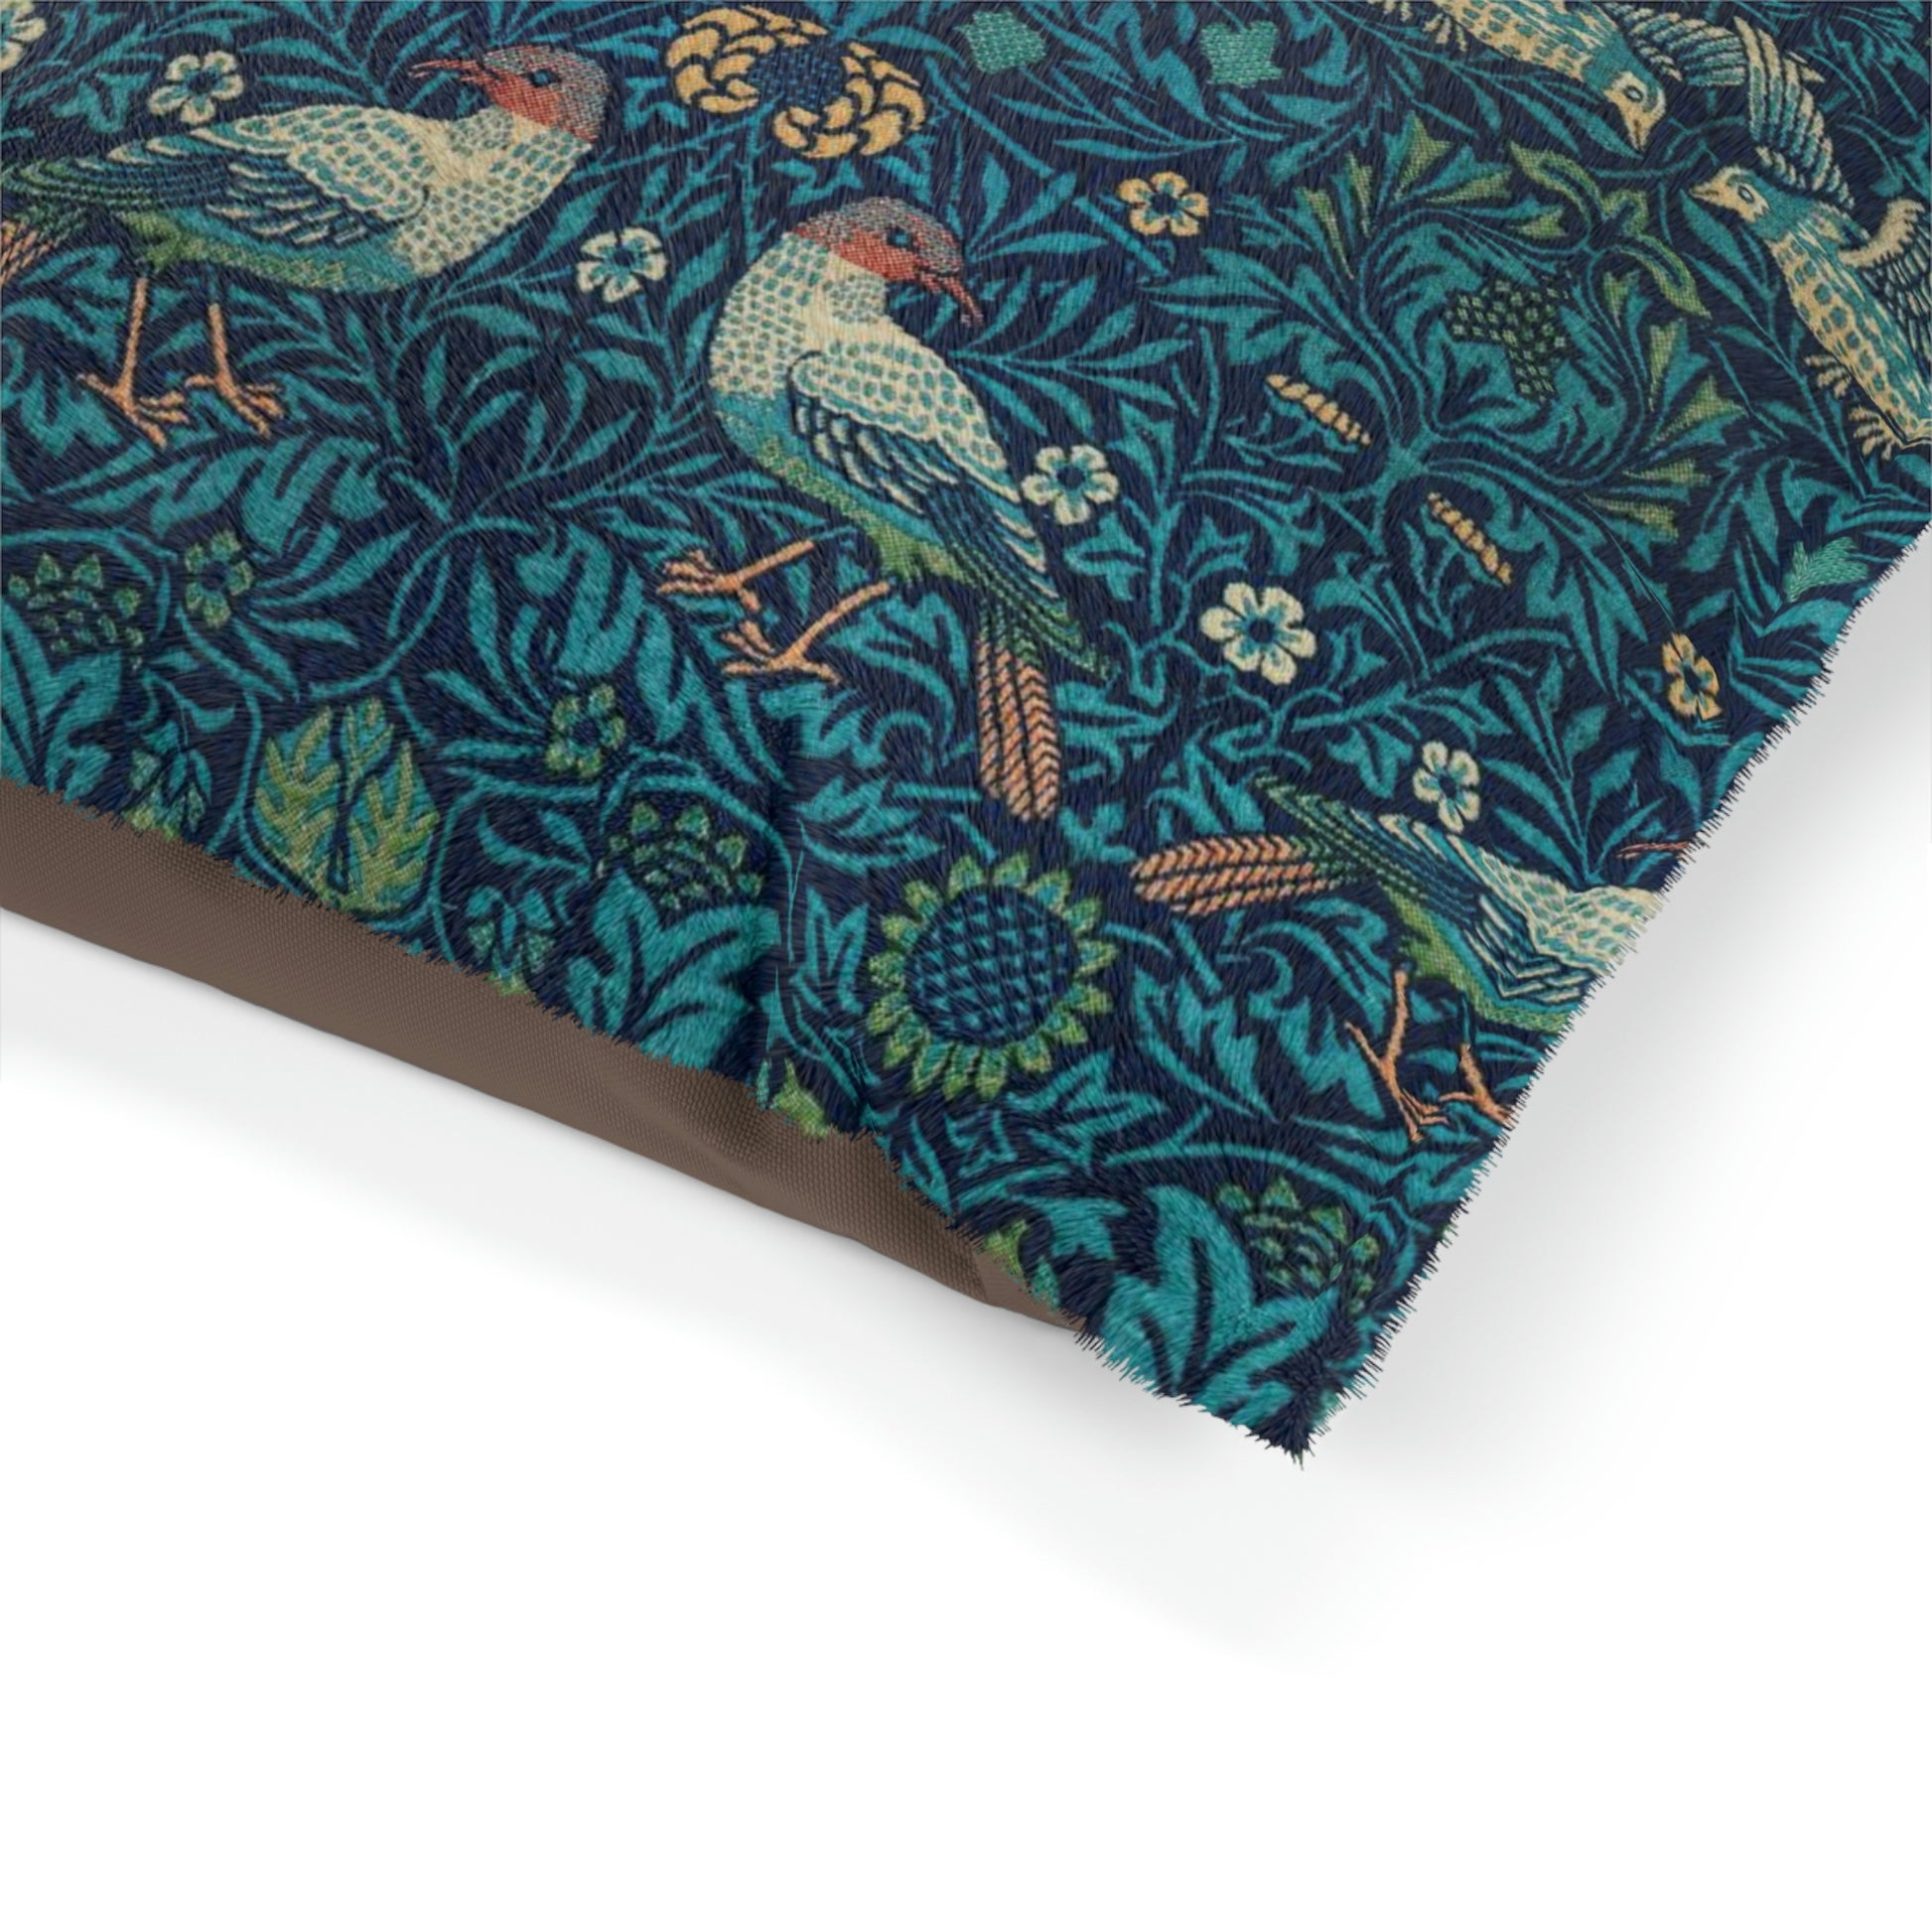 William-Morris-&-Co-Pet-Bed-Blue-Bird-Collection-4